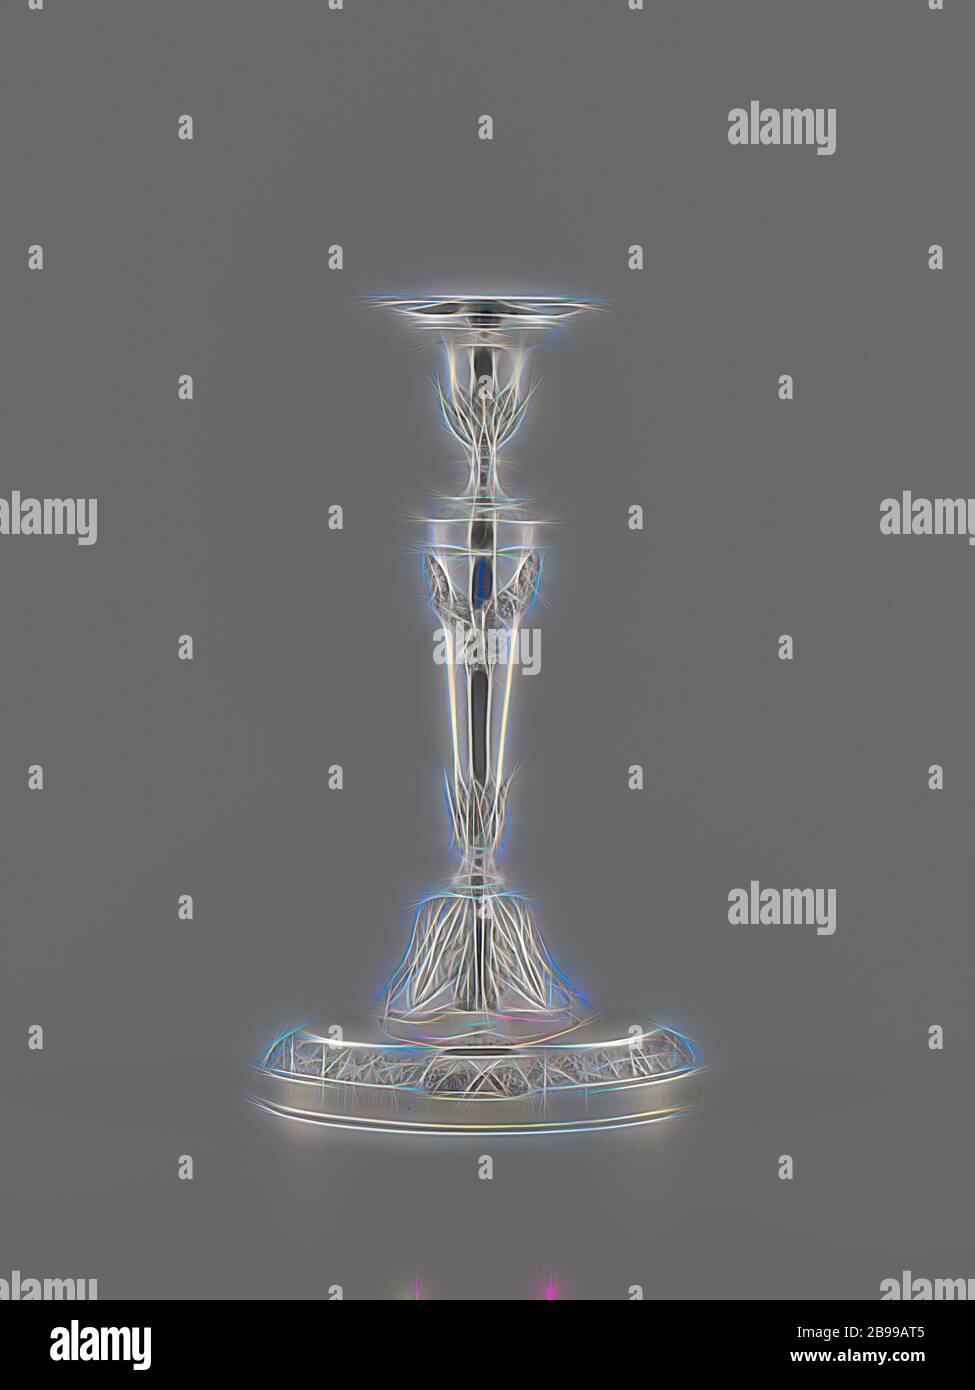 Candlestick, Candlestick with base. Marked and dated, foliage, ornament, vine, Isaac Jean Alexandre Gogel, Francois Marcus Simons, The Hague, 1803, silver (metal), founding, h 29.5 cm × w 16.5 cm × l 11.3 gr × w 486.0 gr, Reimagined by Gibon, design of warm cheerful glowing of brightness and light rays radiance. Classic art reinvented with a modern twist. Photography inspired by futurism, embracing dynamic energy of modern technology, movement, speed and revolutionize culture. Stock Photo